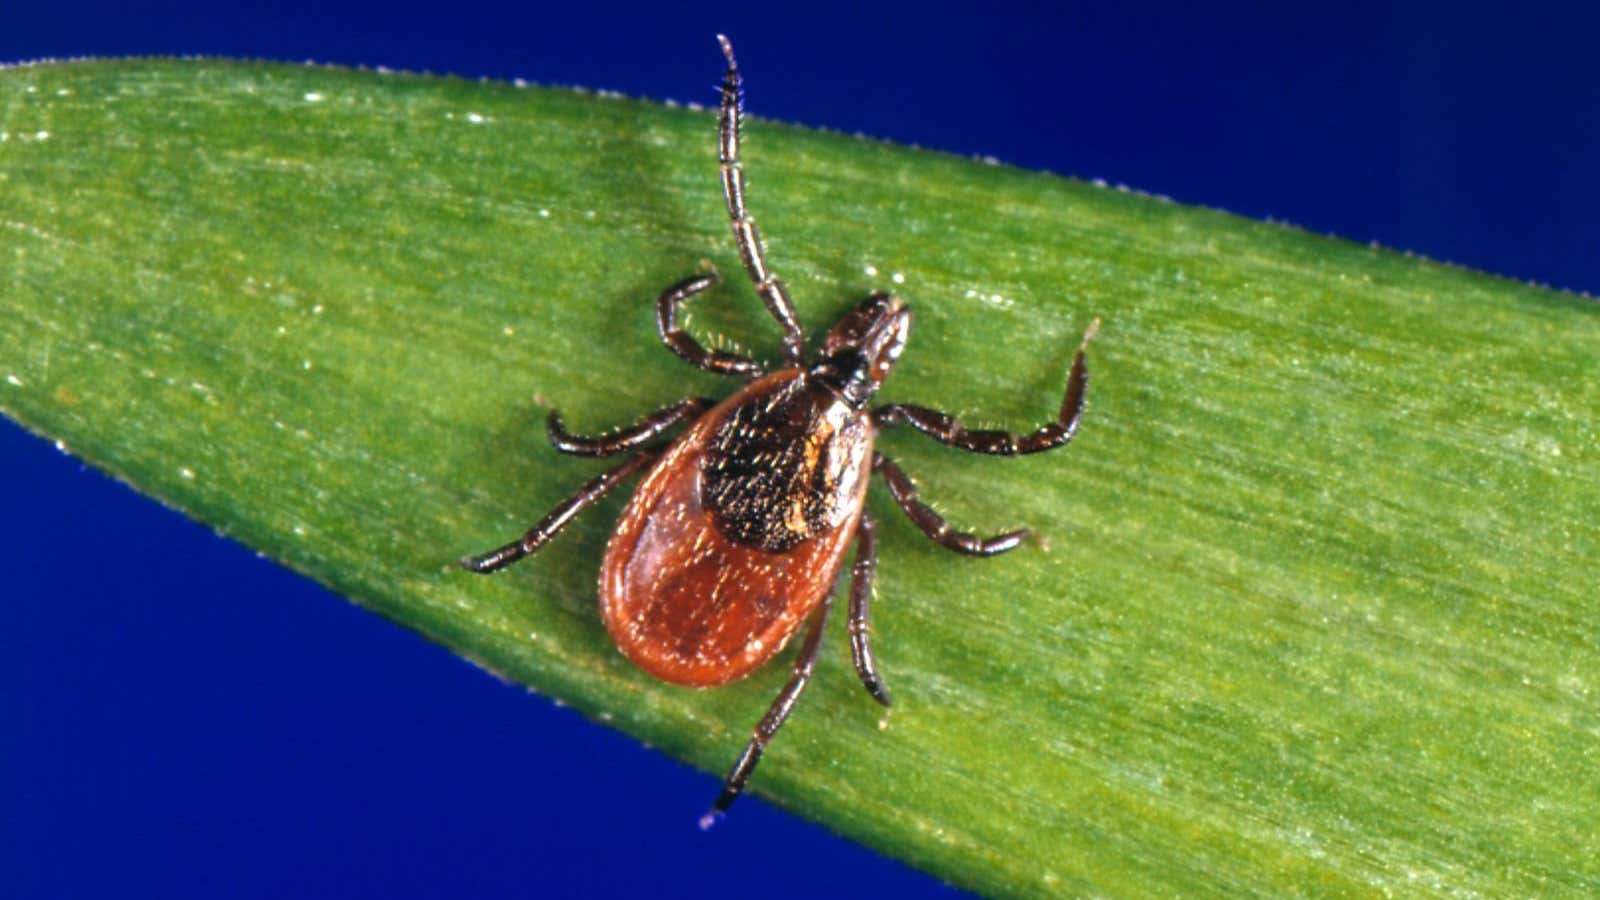 The smaller cousin of the long-horned tick, the deer tick.